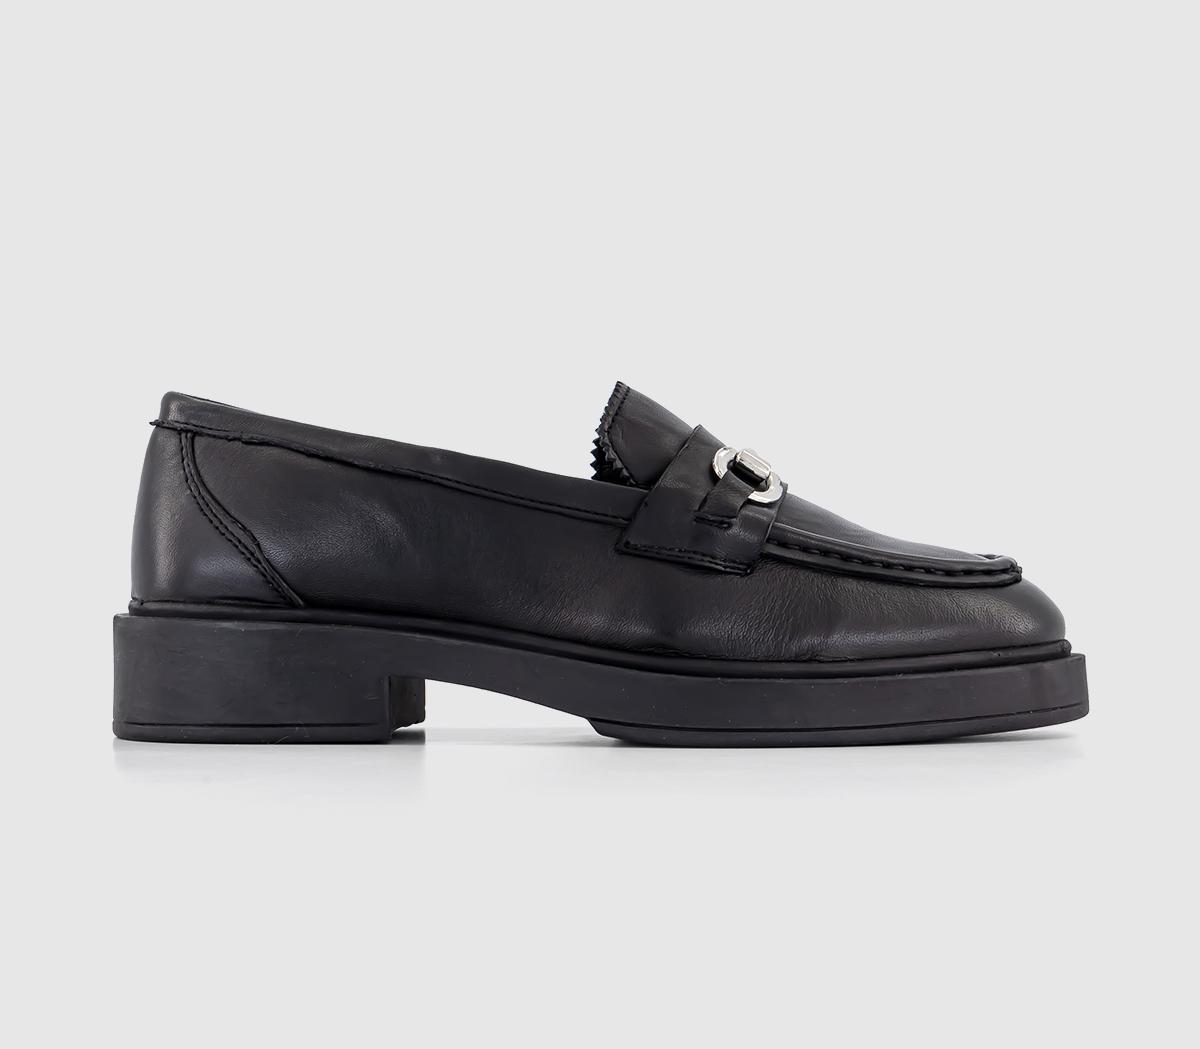 Fidgeting Leather Trim Penny Loafers Black Leather